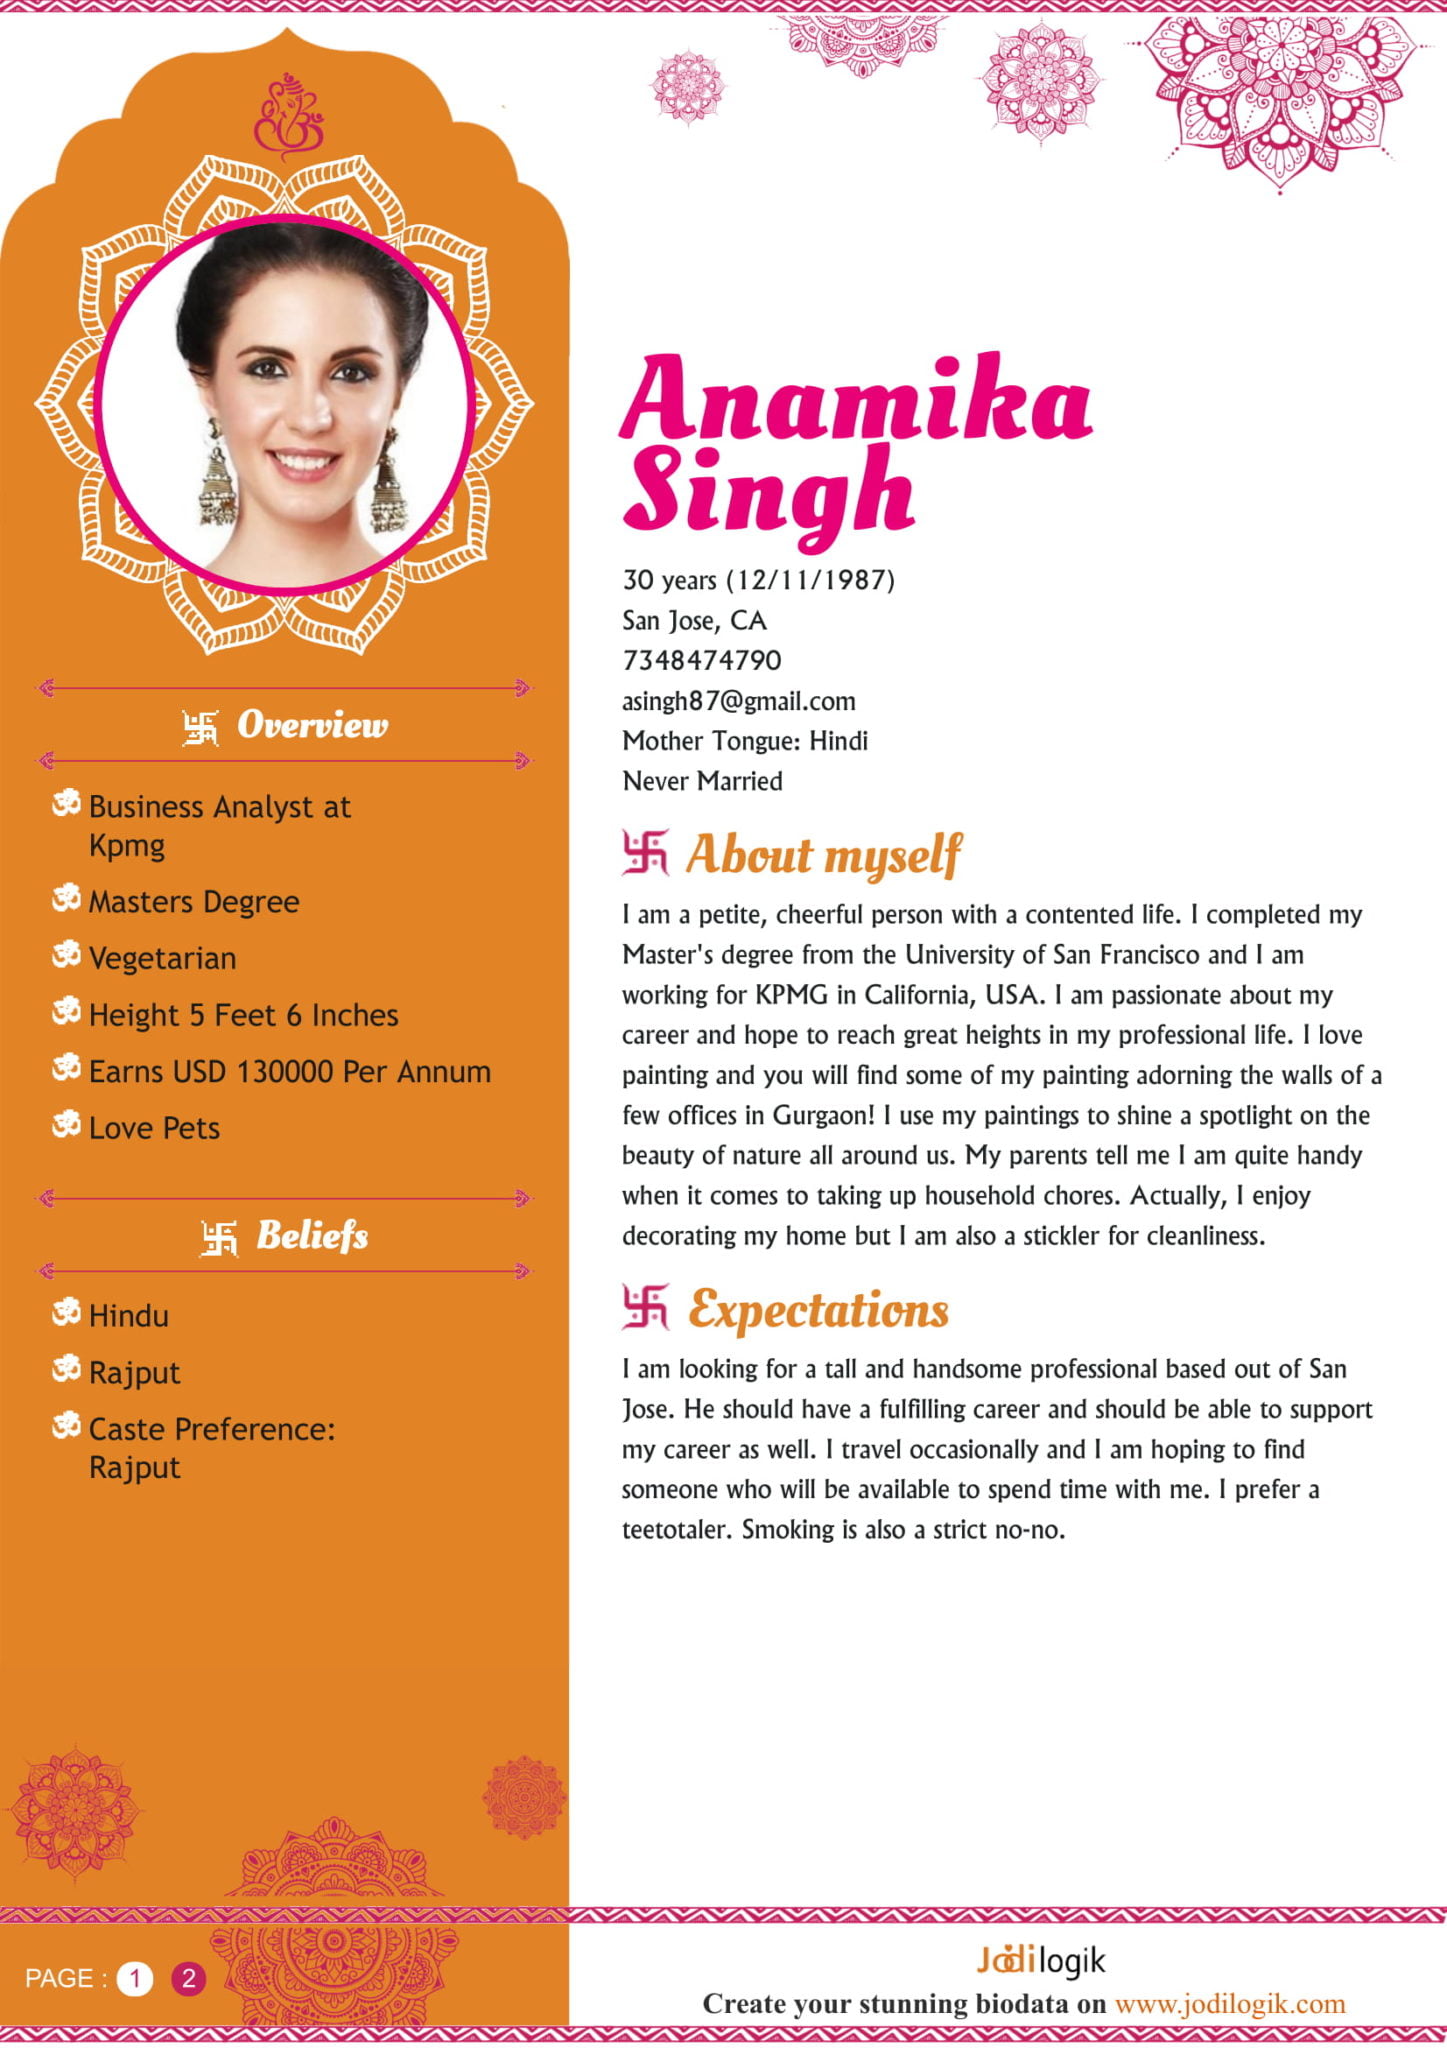 My Biodata In English / Marriage profile app is useful to create